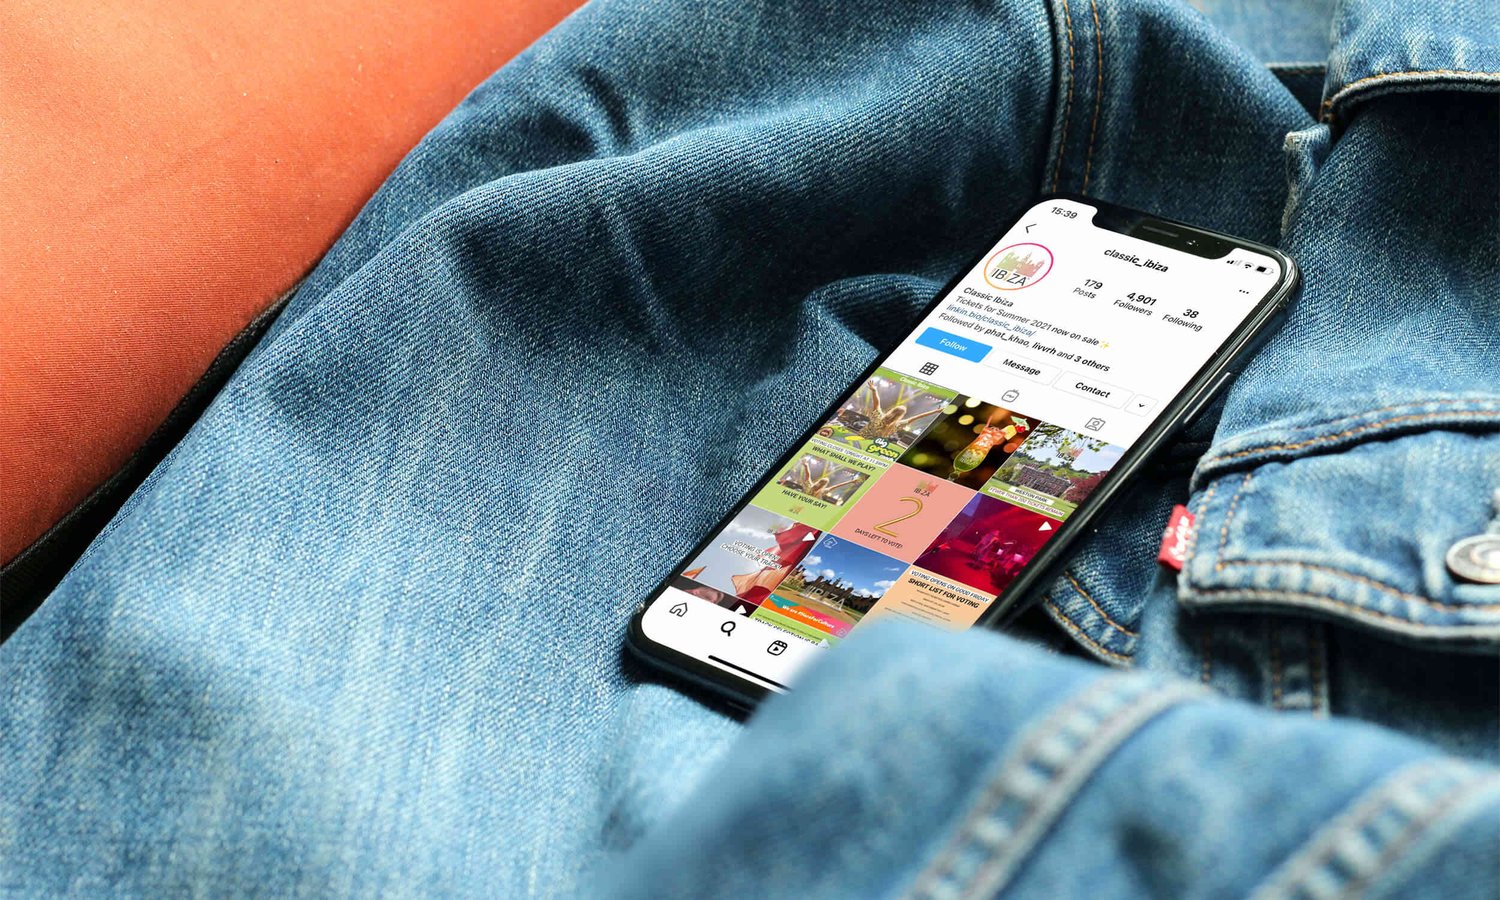 Smartphone on denim jacket displaying the instagram feed for Classic Ibiza